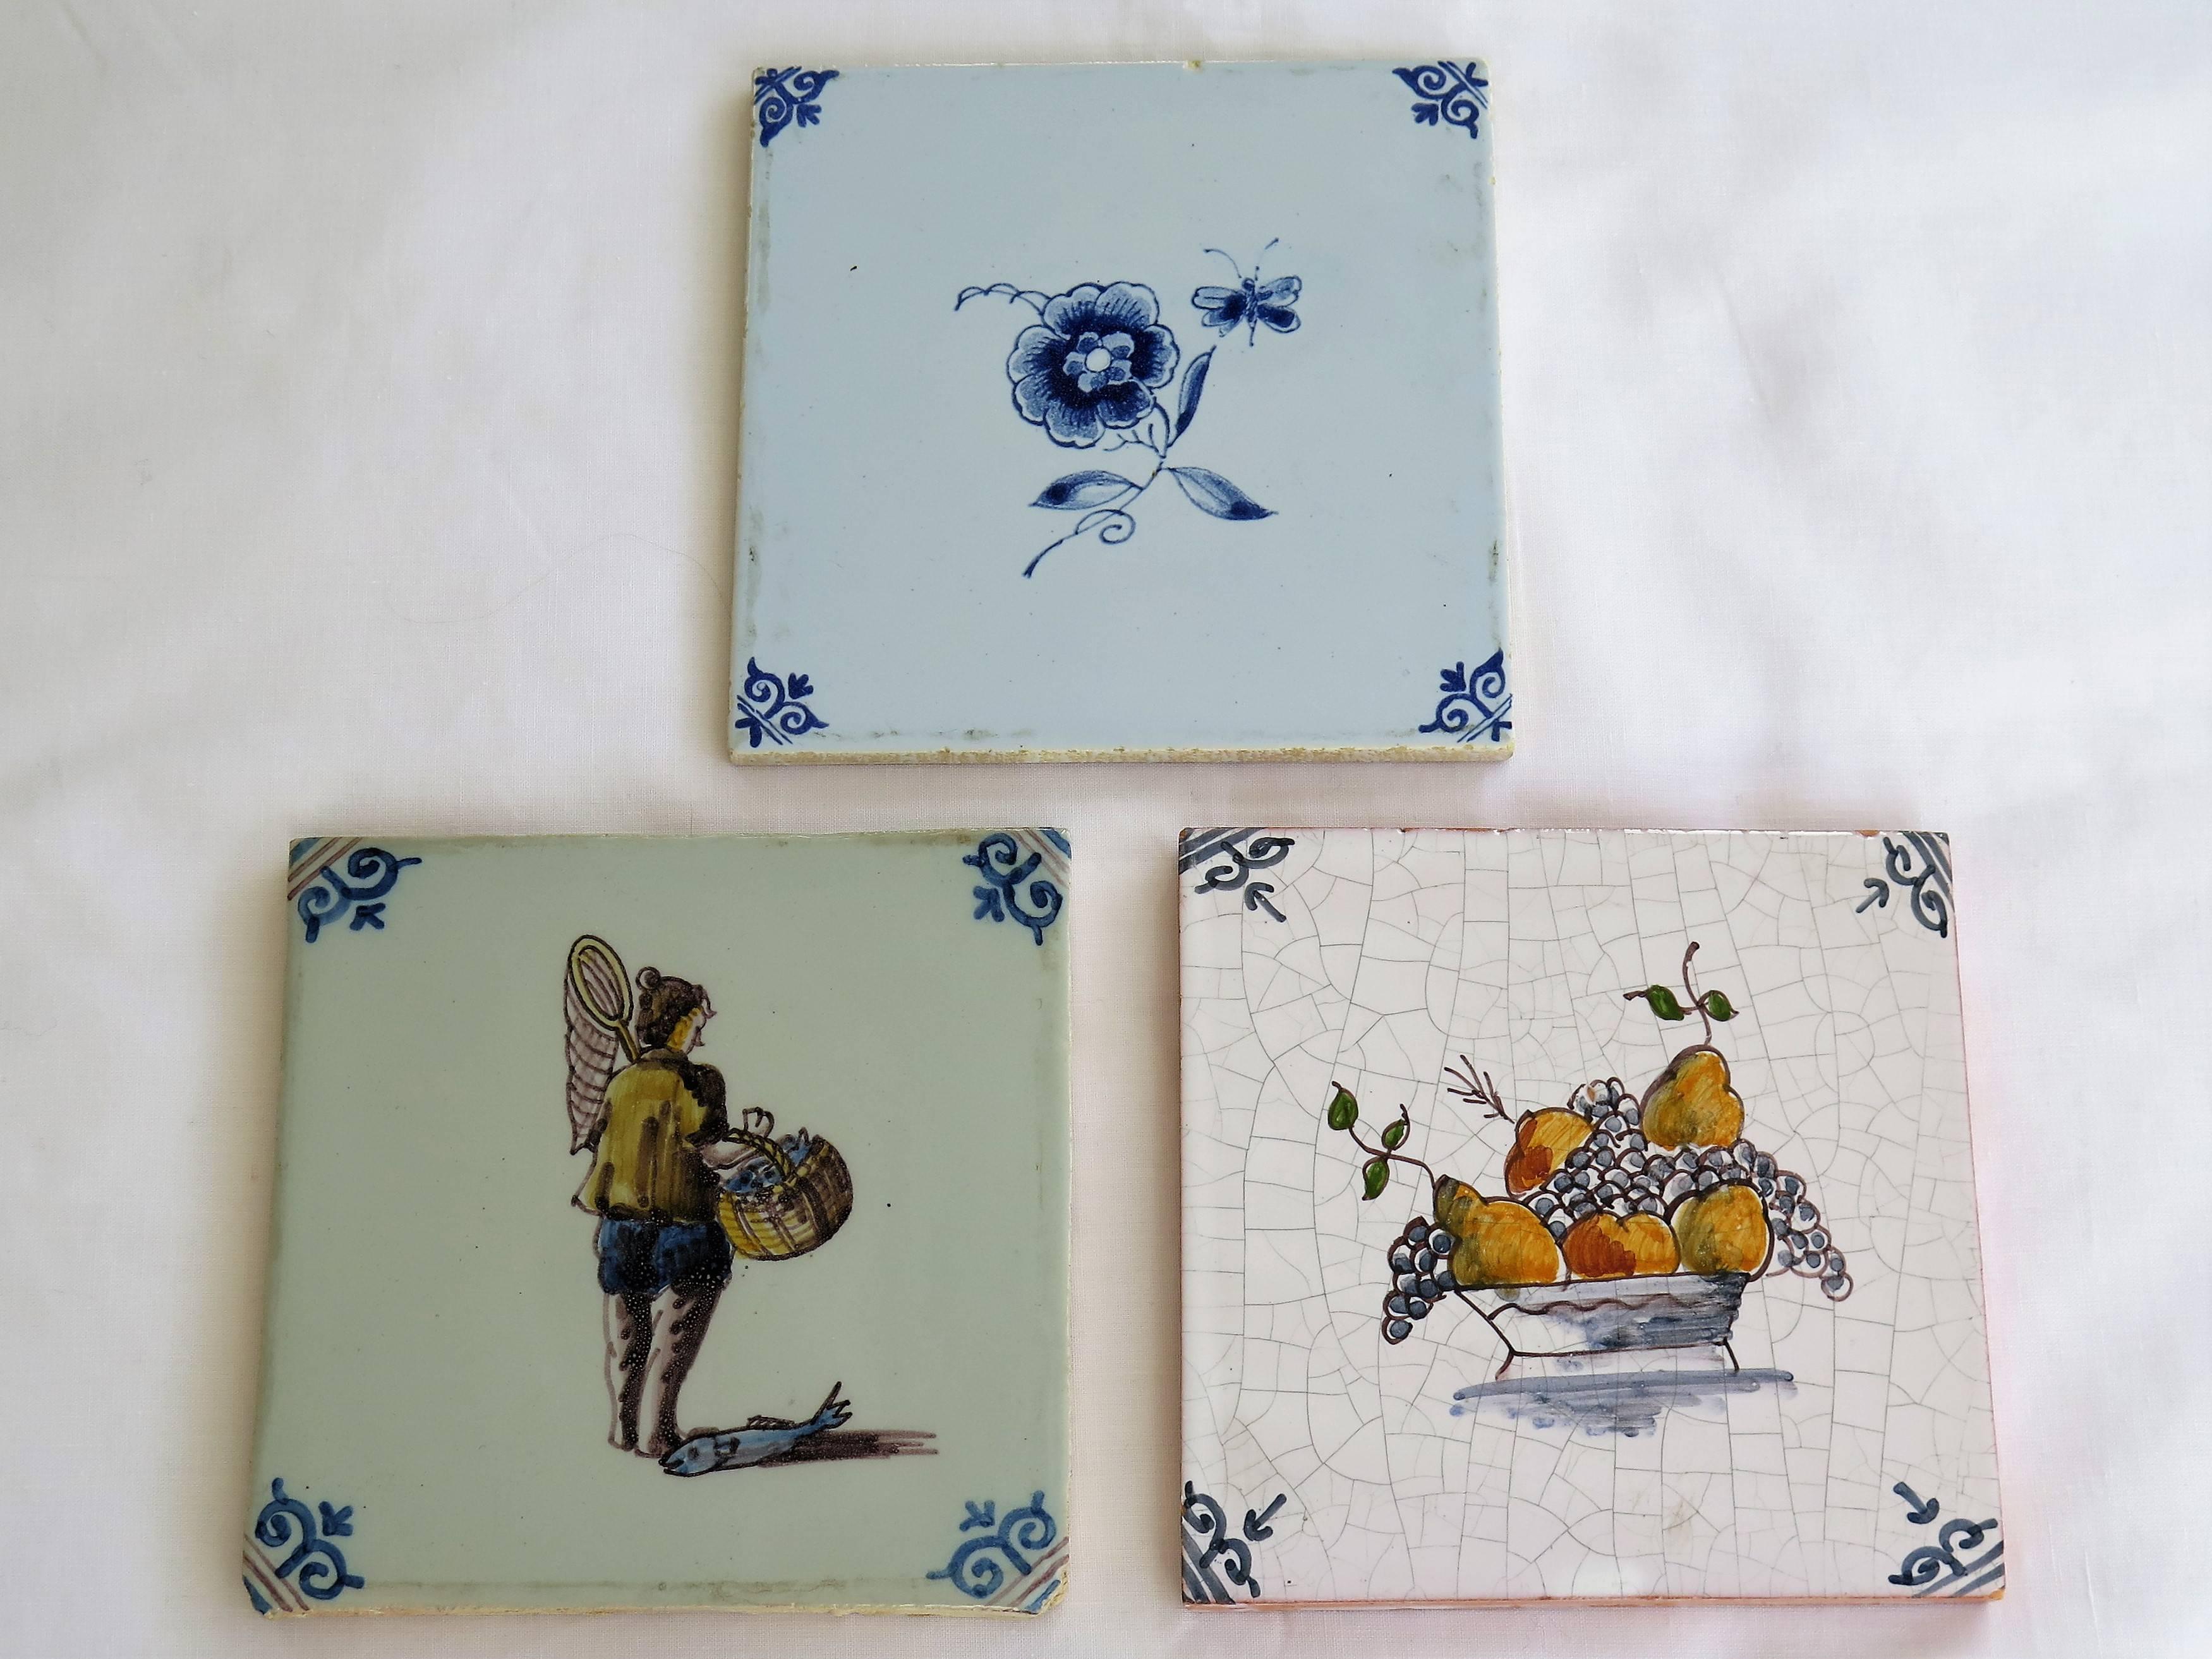 These are three attractive Dutch (Netherlands), Delft ceramic wall tiles, the coloured Polychrome ones dating to the 19th century, with the blue and white tile being early / mid 20th Century

All tiles are nominally 5 inches square and 5/16 inches